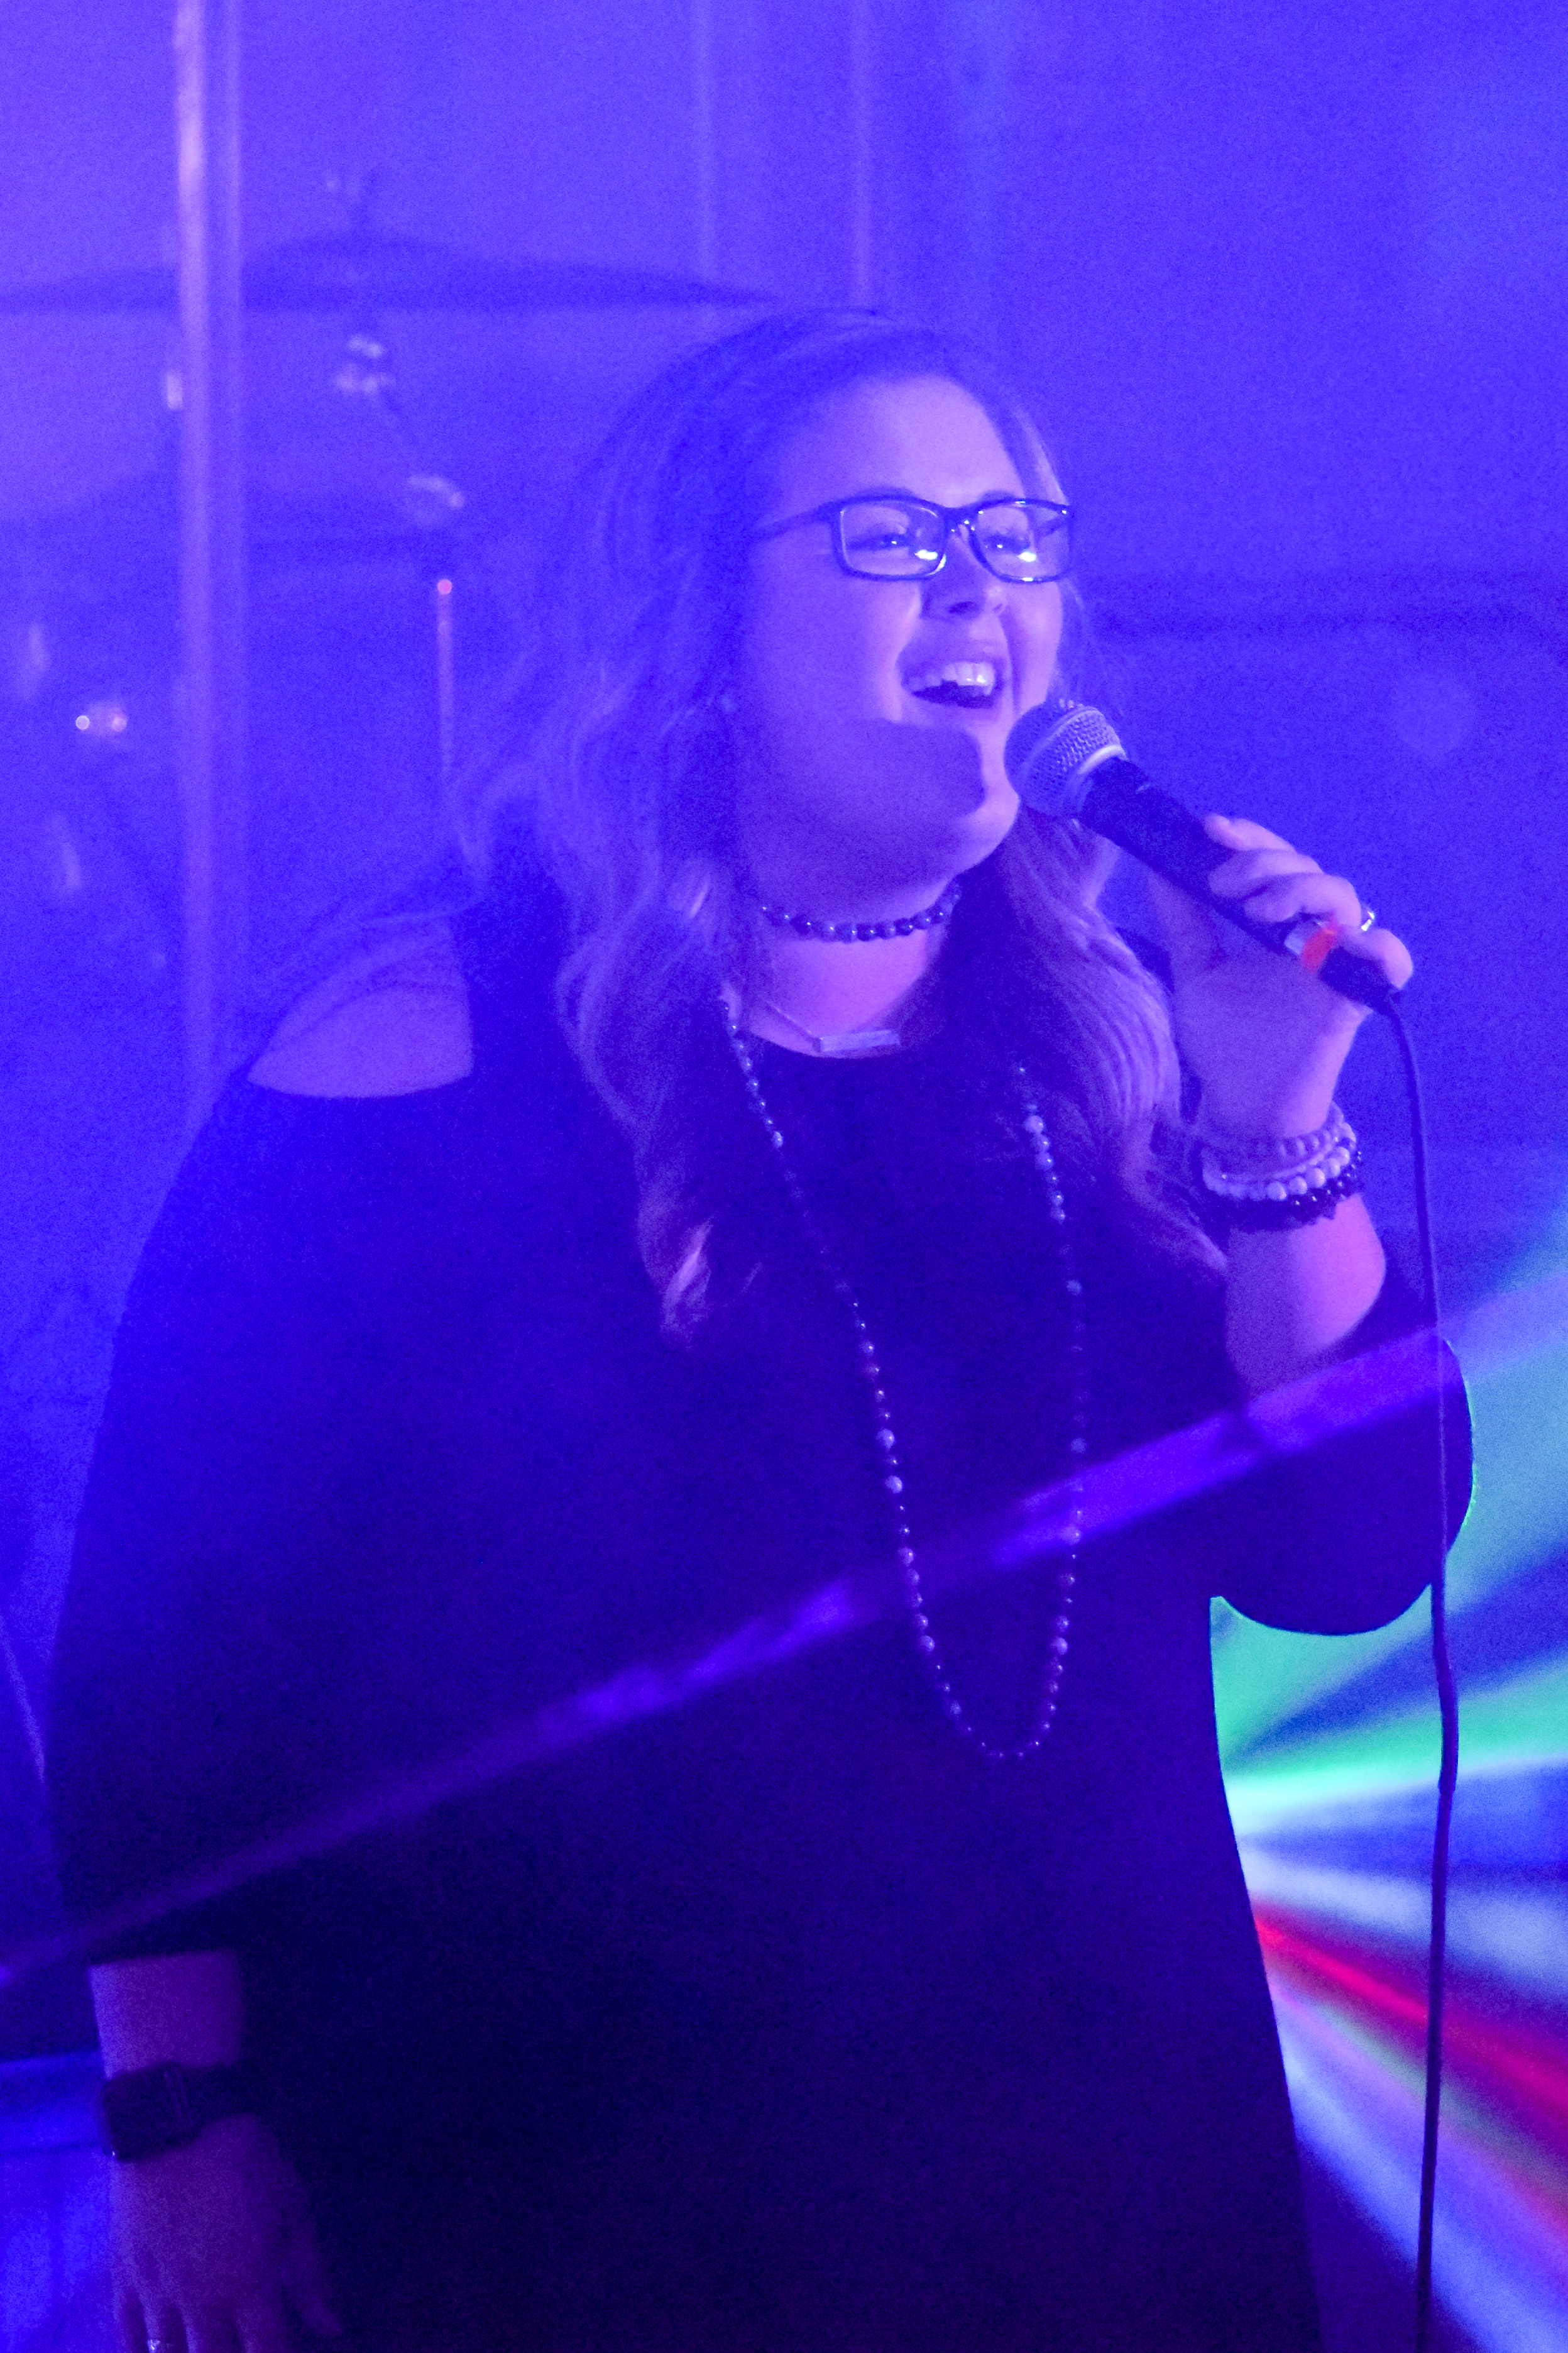 Senior, Cameron Burroughs, shows the passion she has for singing about the Lord.